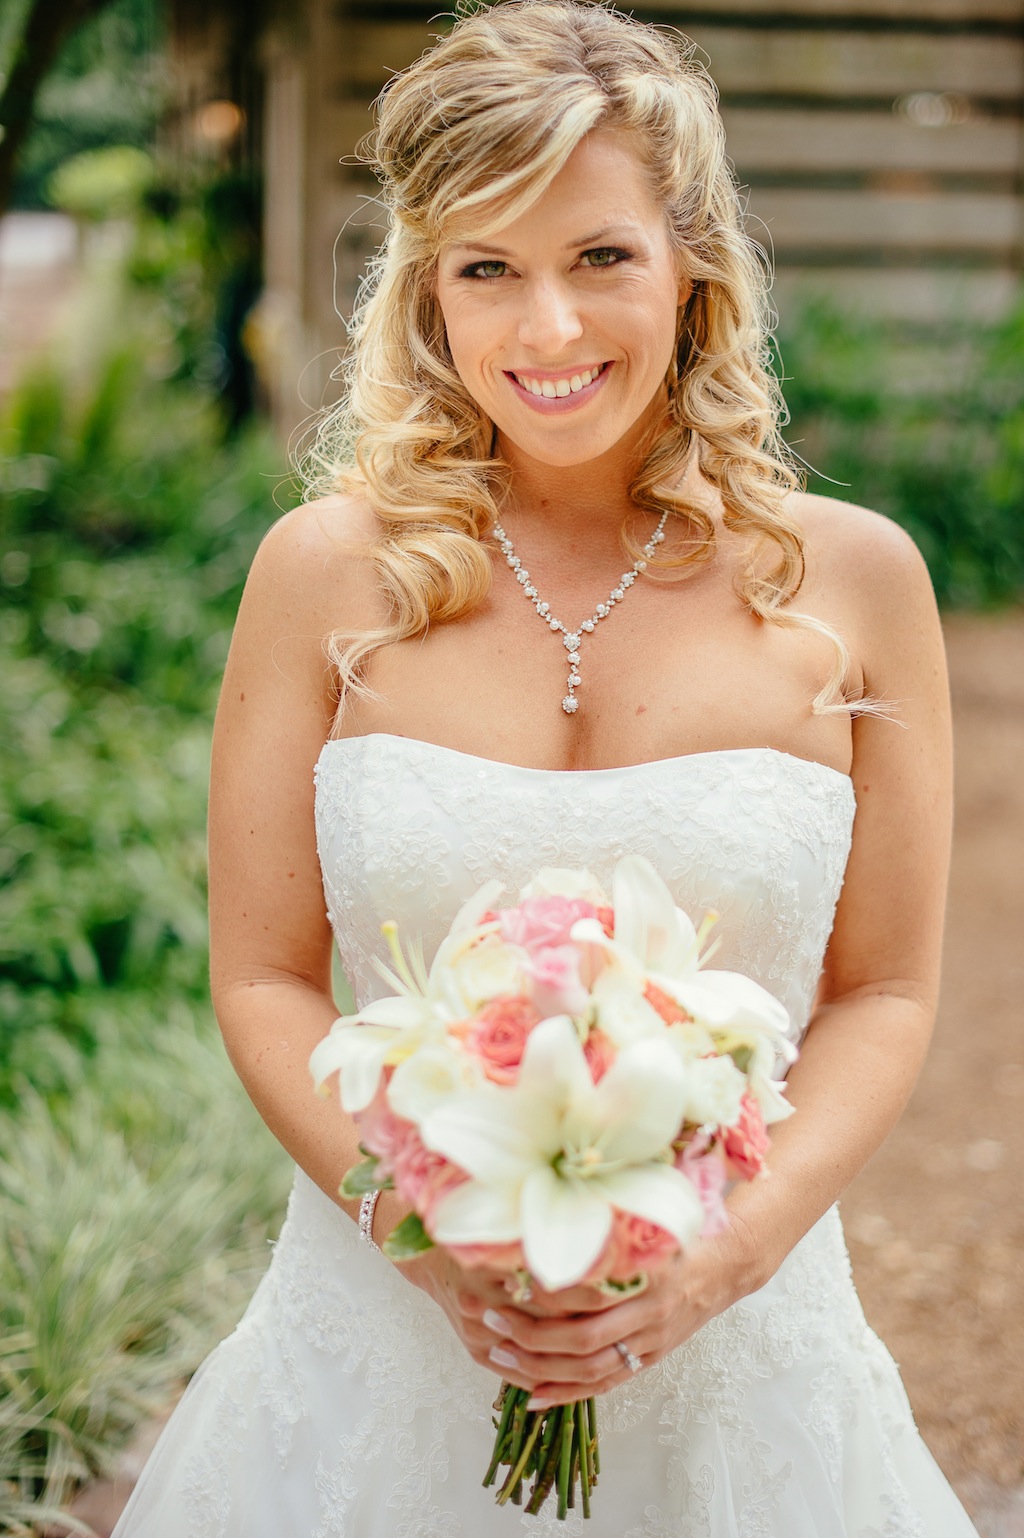 Cross Creek Ranch Wedding near Tampa Bay, Fl - Rustic Rose, Burlap and Lace by Lakeland Wedding Photographer Sunglow Photography (12)